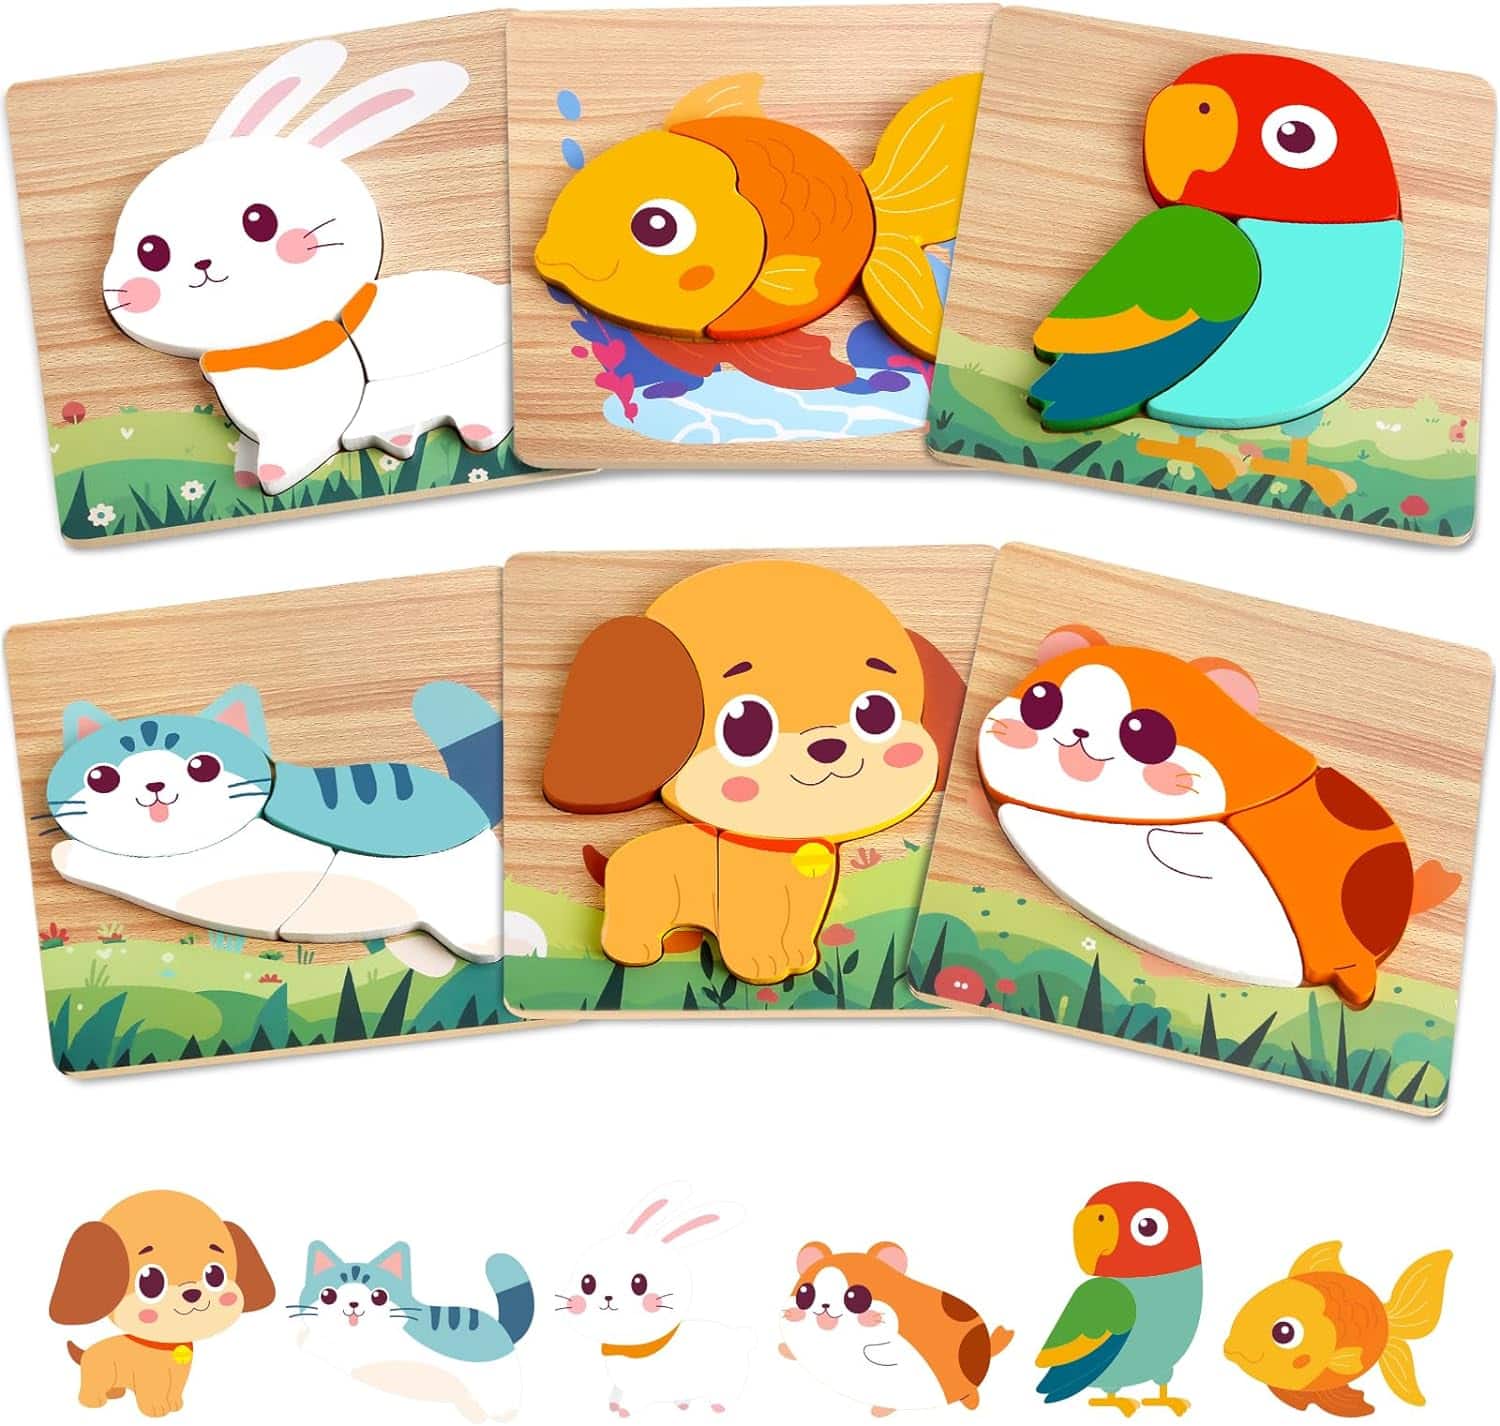 Wooden Puzzles for Toddlers 1-3, Pet Animals Jigsaw Puzzles for Baby Puzzles 12-18 Months, Learning Educational Puzzles for Kids Girl boy Birthday Gift Travel Autistic Wooden Toys